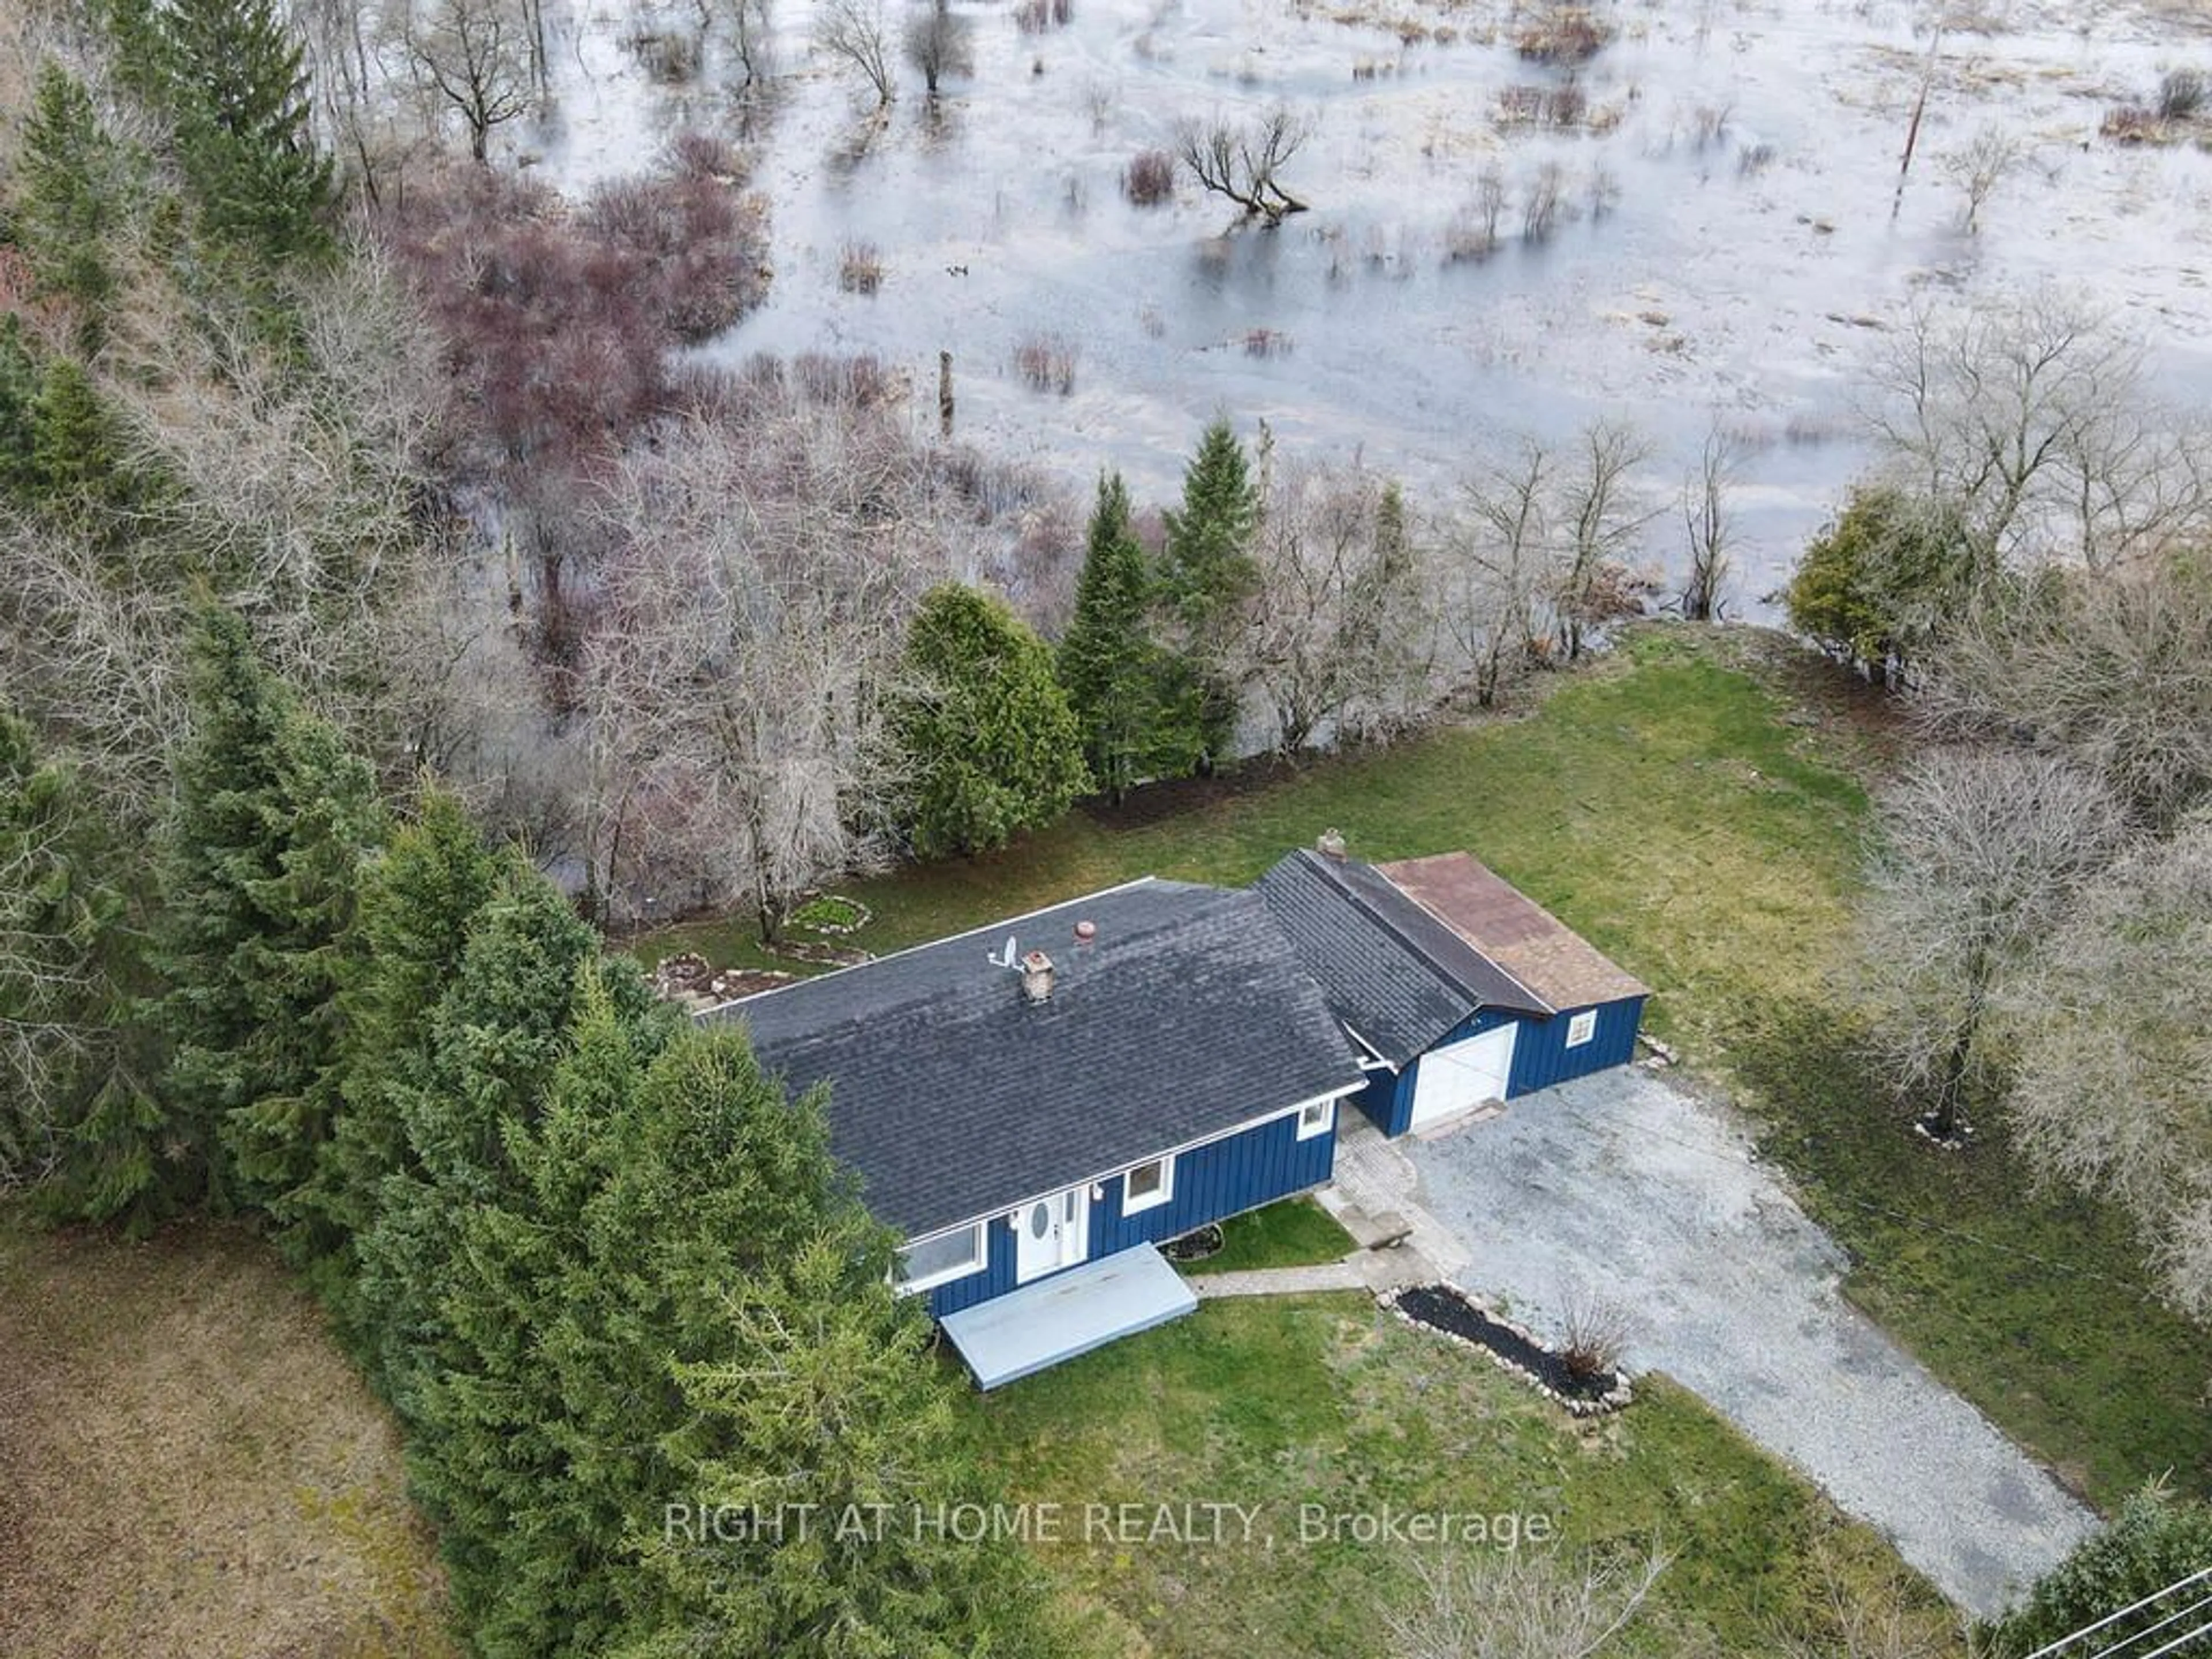 Frontside or backside of a home for 21726 48, East Gwillimbury Ontario L0G 1M0